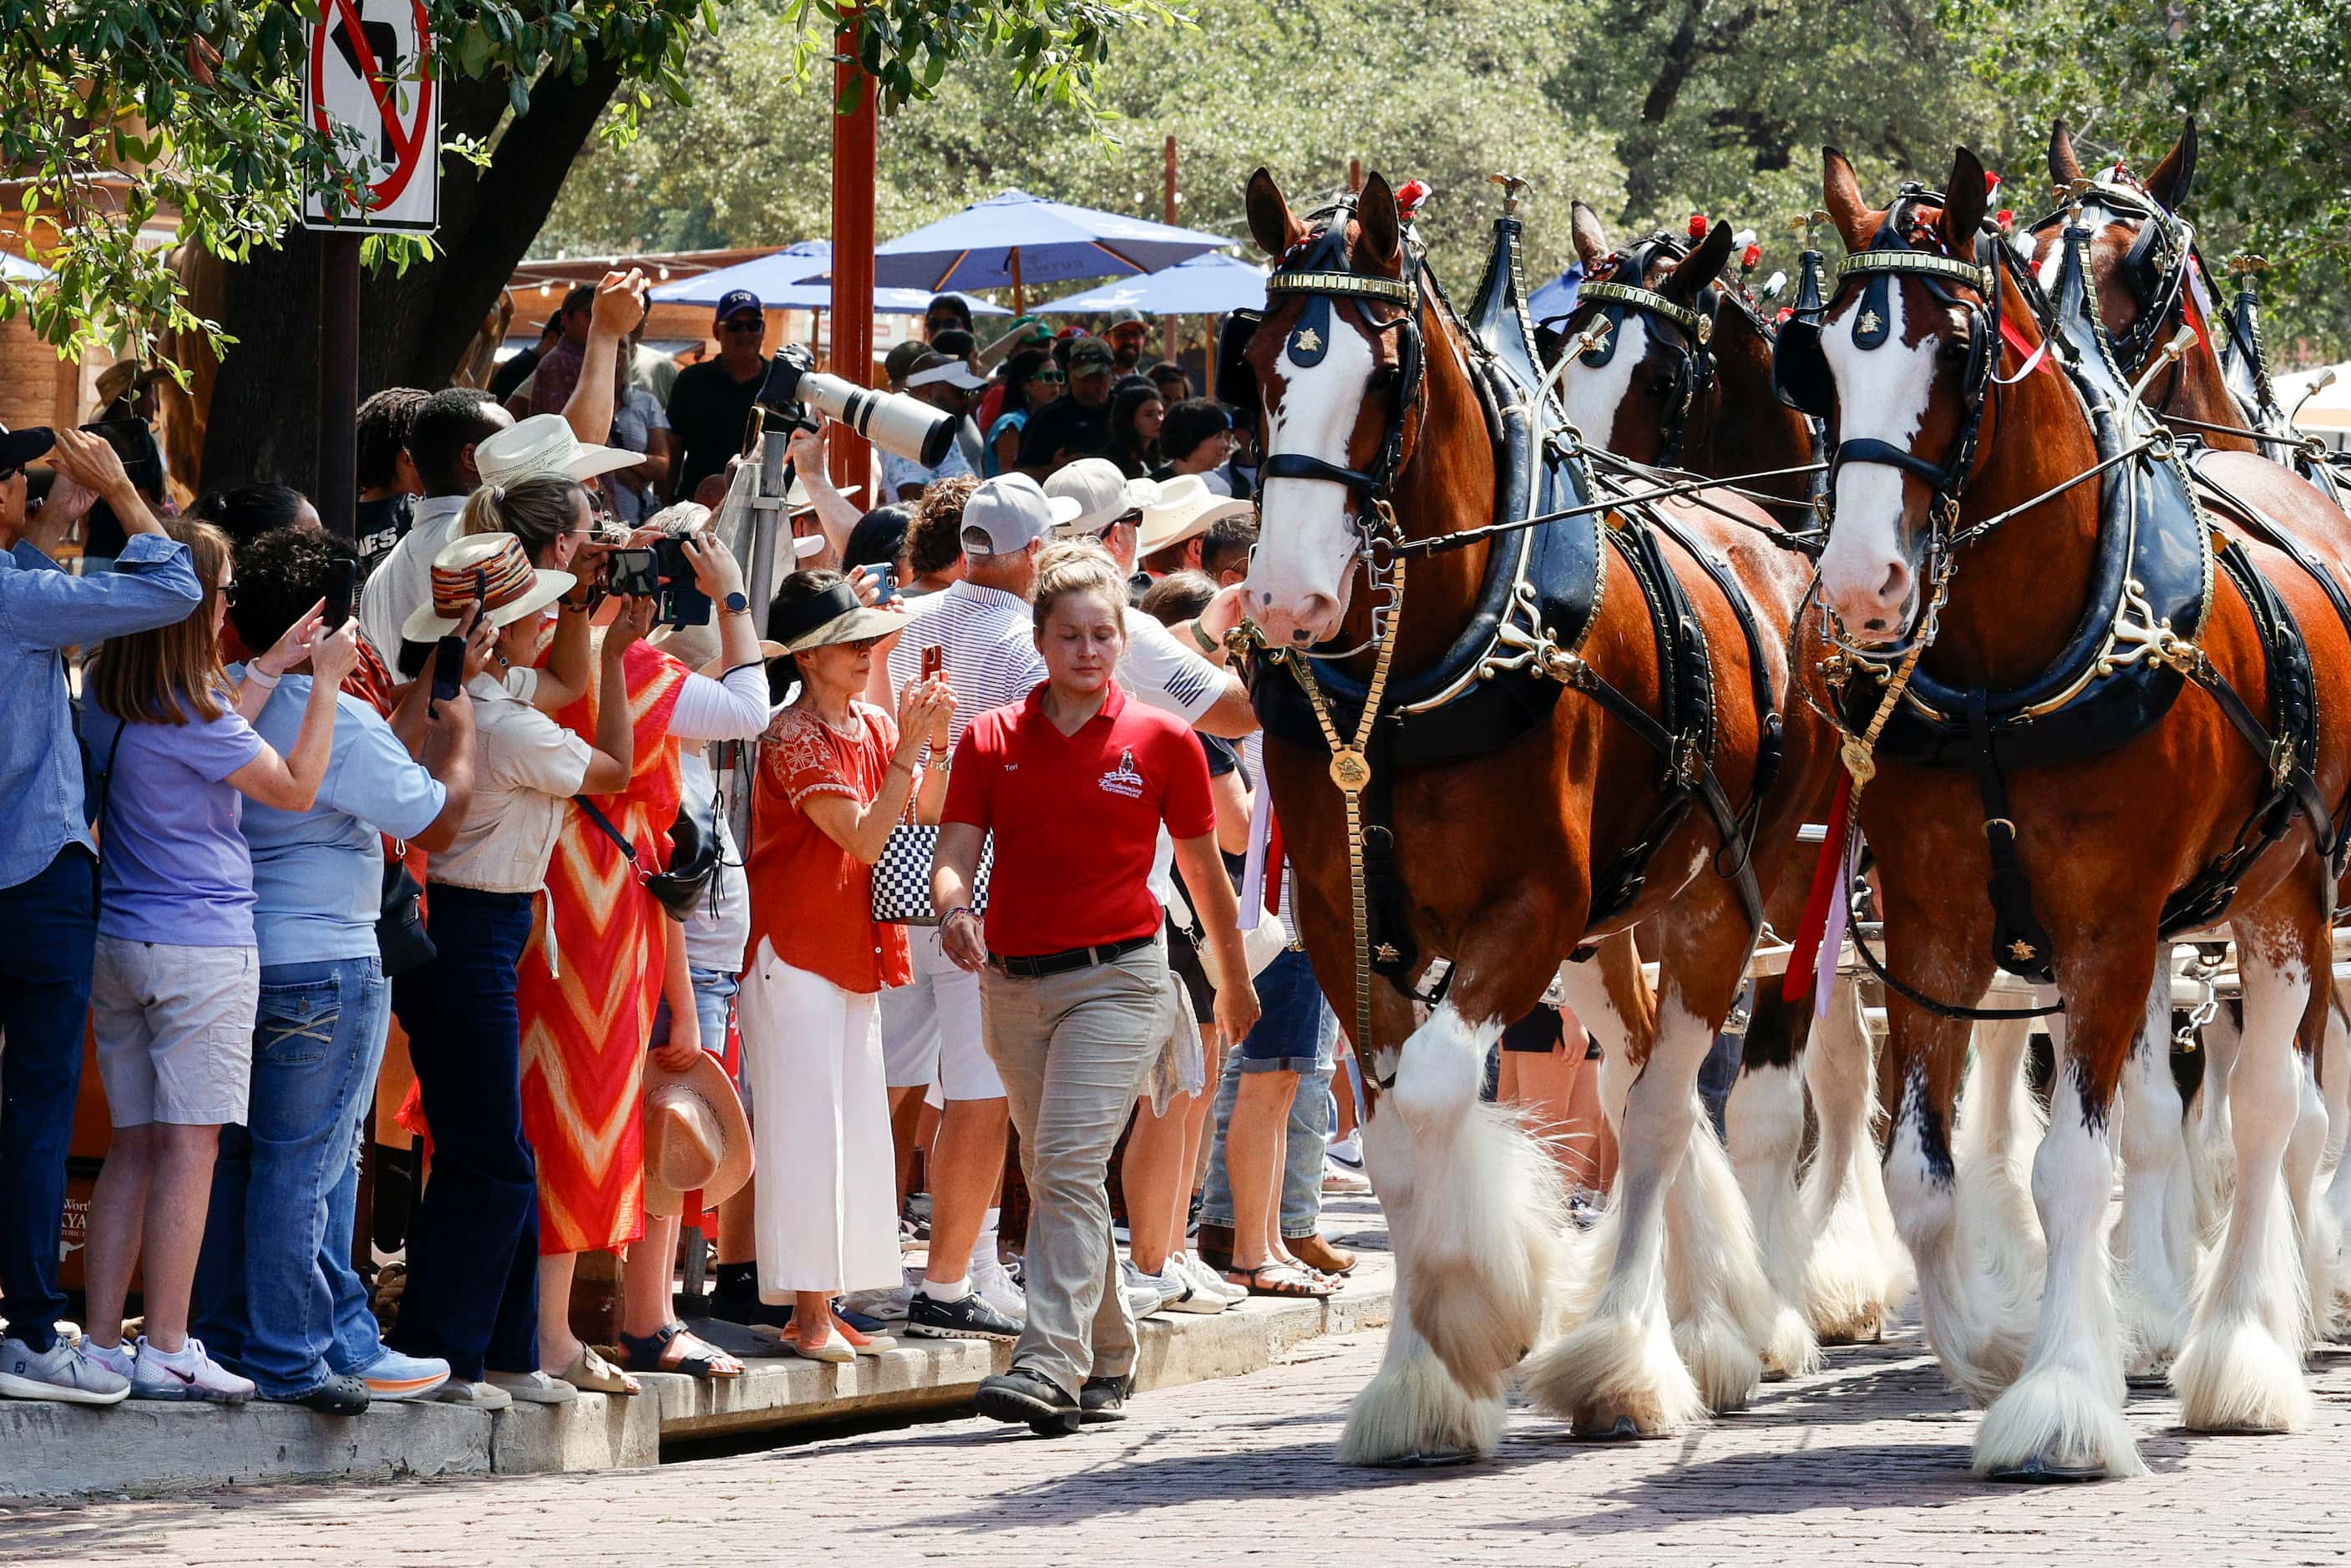 People take photos and videos as the Budweiser Clydesdales make their way through The...